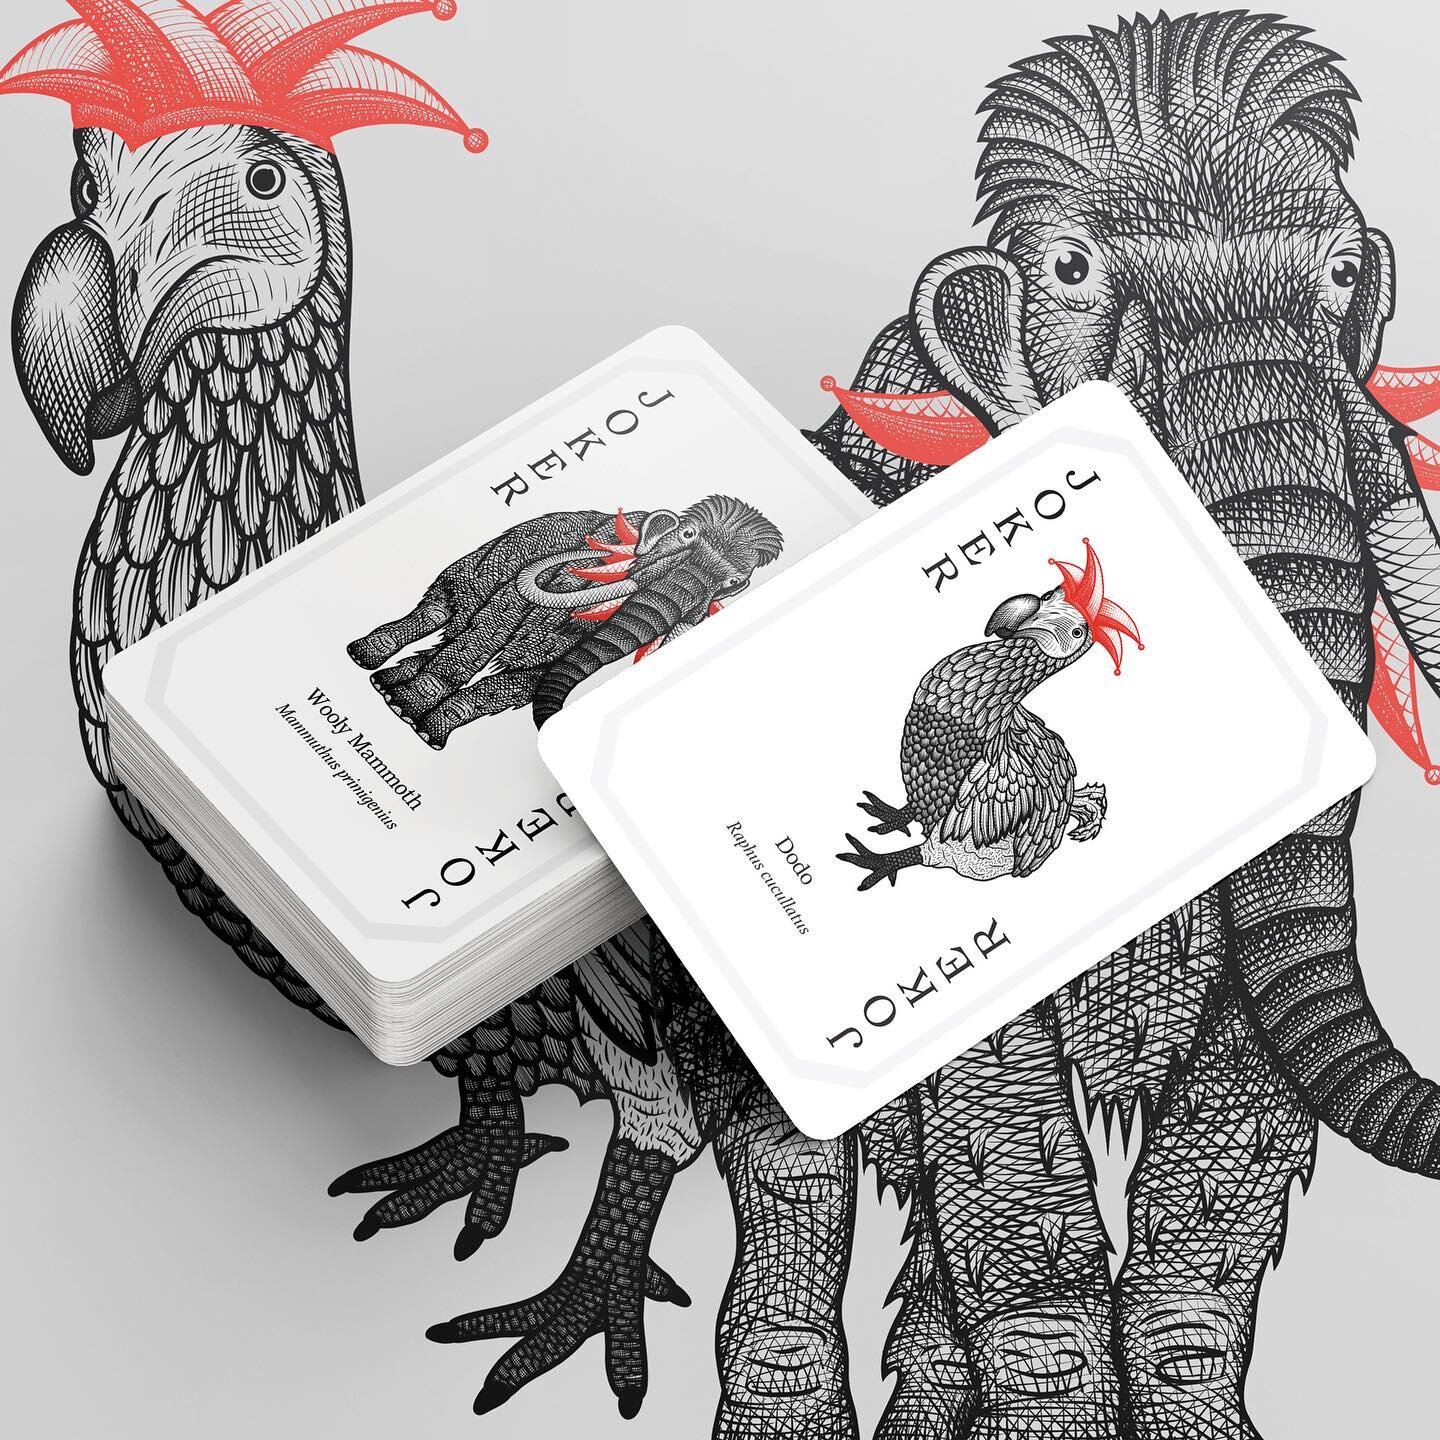 BIG REVEAL: The Protected Pack Jokers. We picked the Dodo and Wooly Mammoth for these extra cards. Extinct species as the jokers felt like a good reminder that the rest of the deck needs our attention and efforts to stay safe. Also, we really wanted 